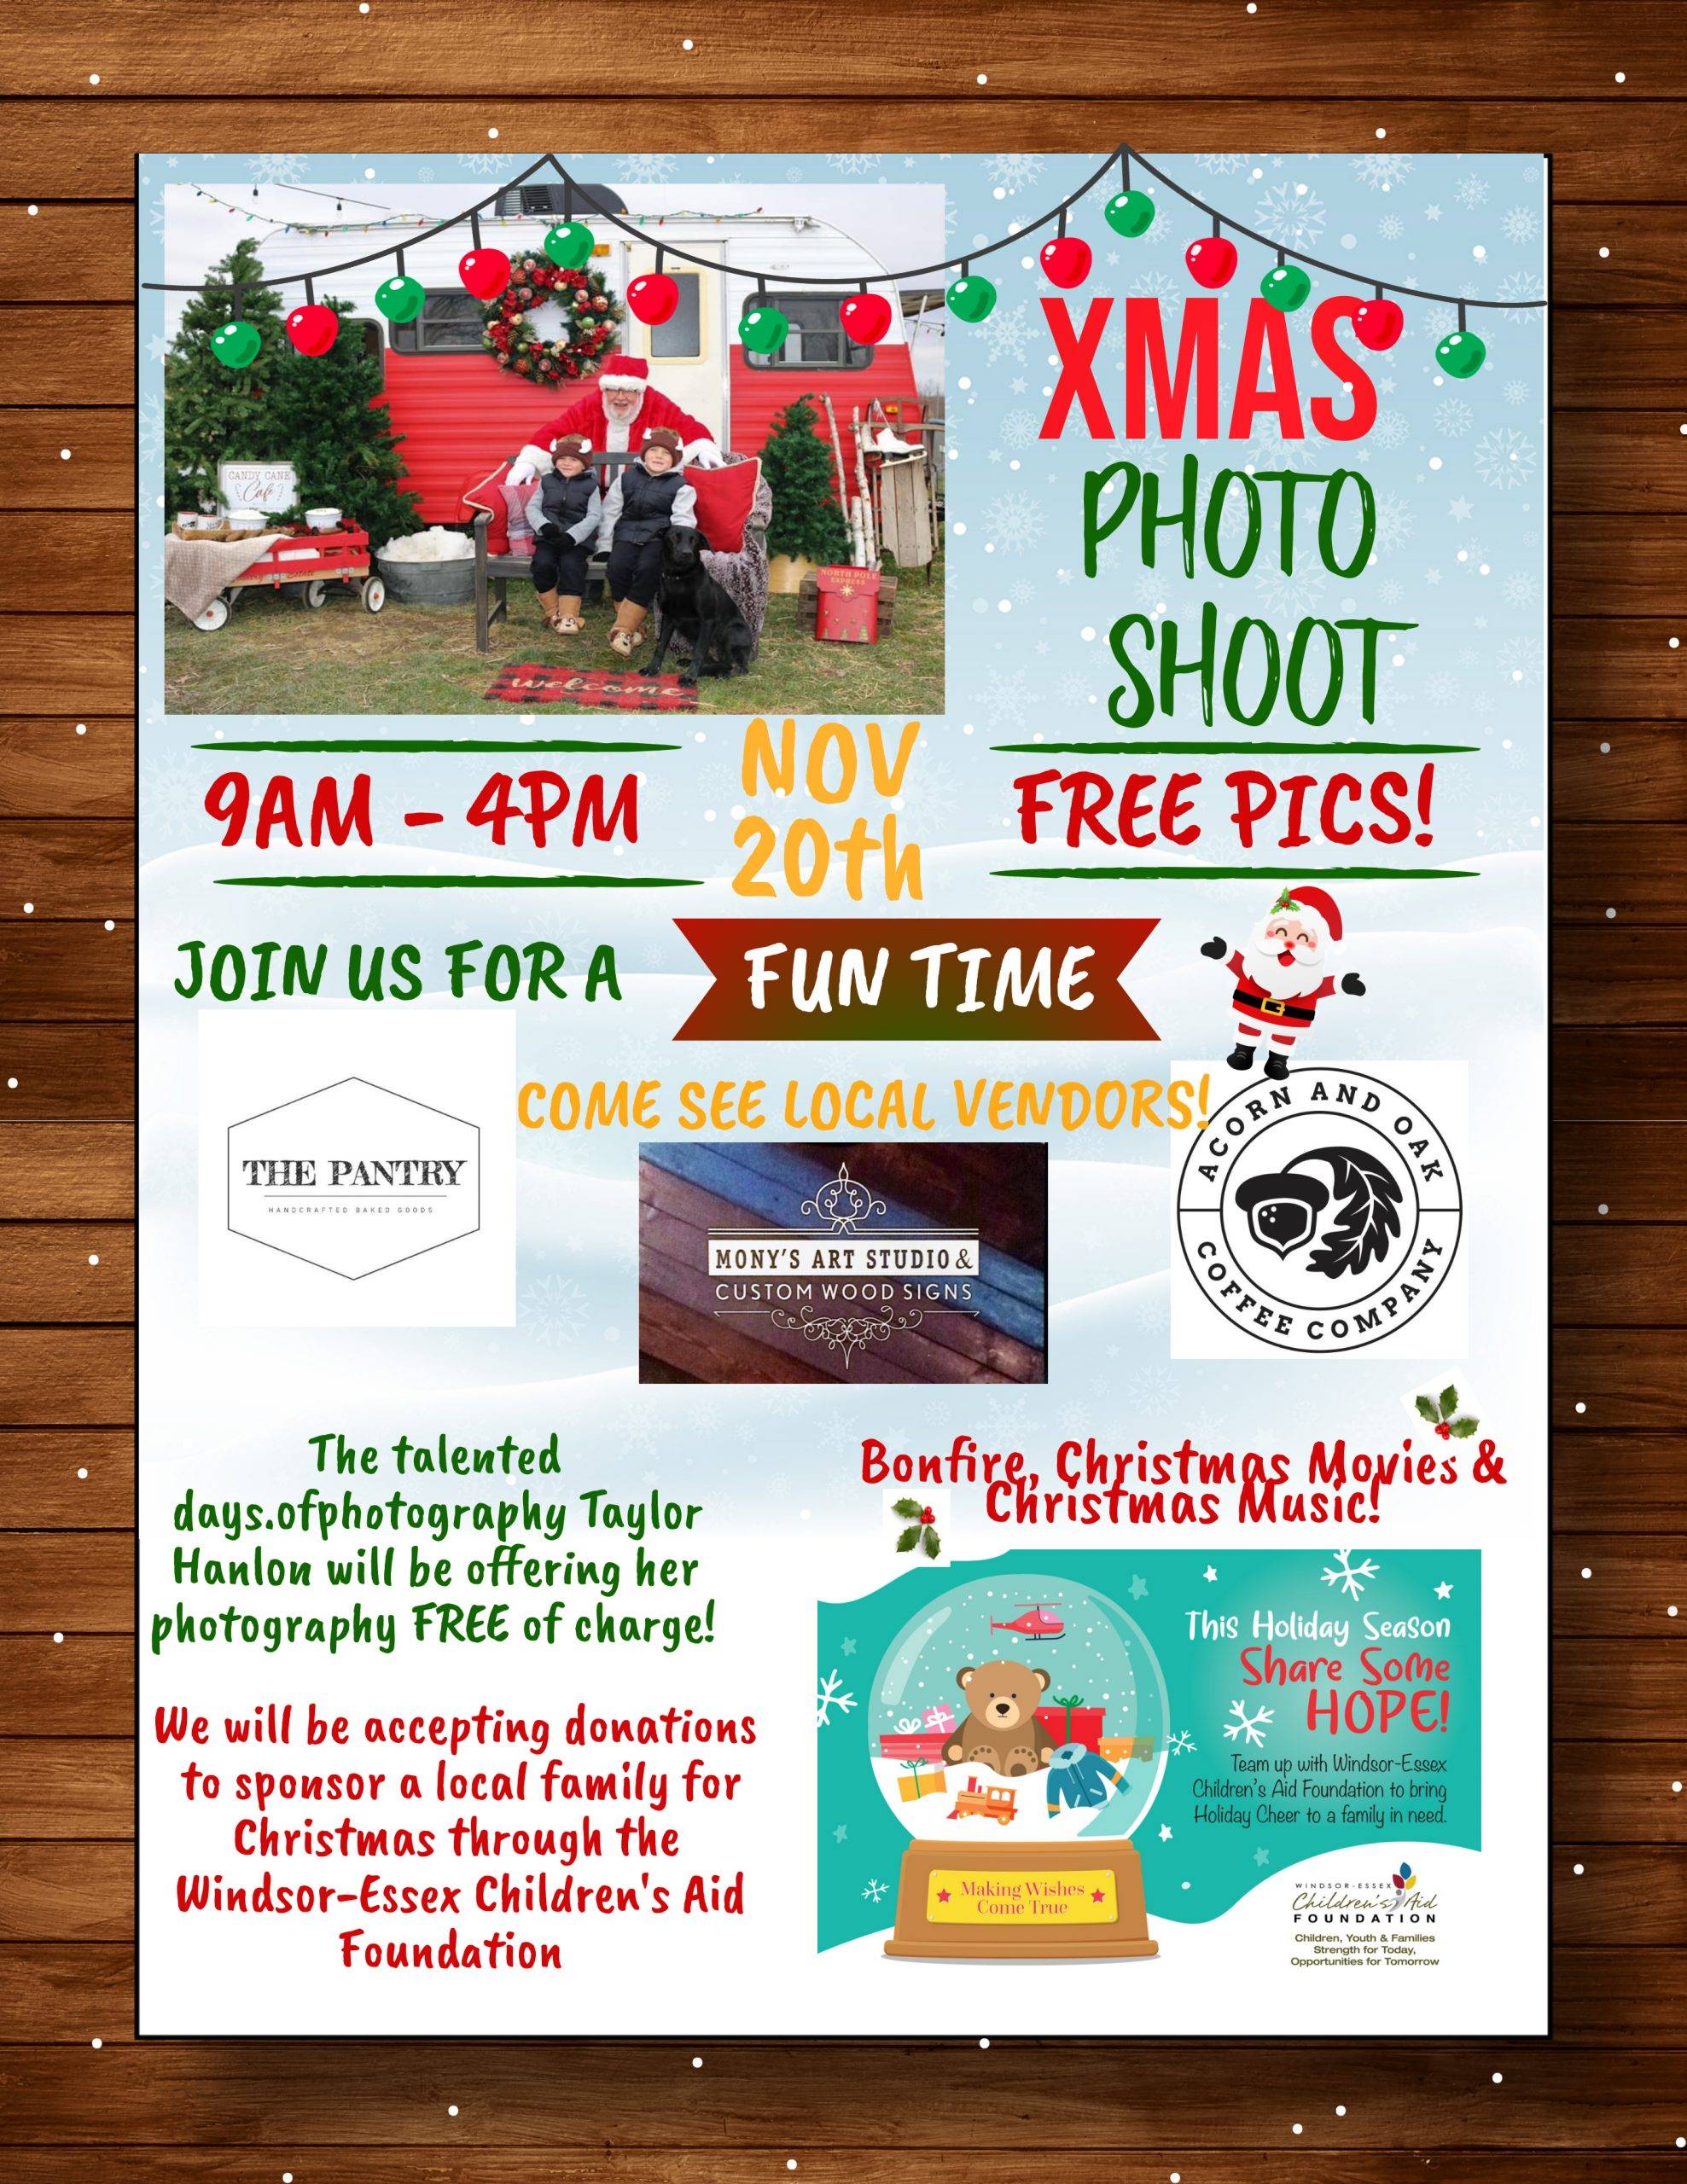 Join us – Saturday November 20th for our Christmas PHOTO SHOOT!!